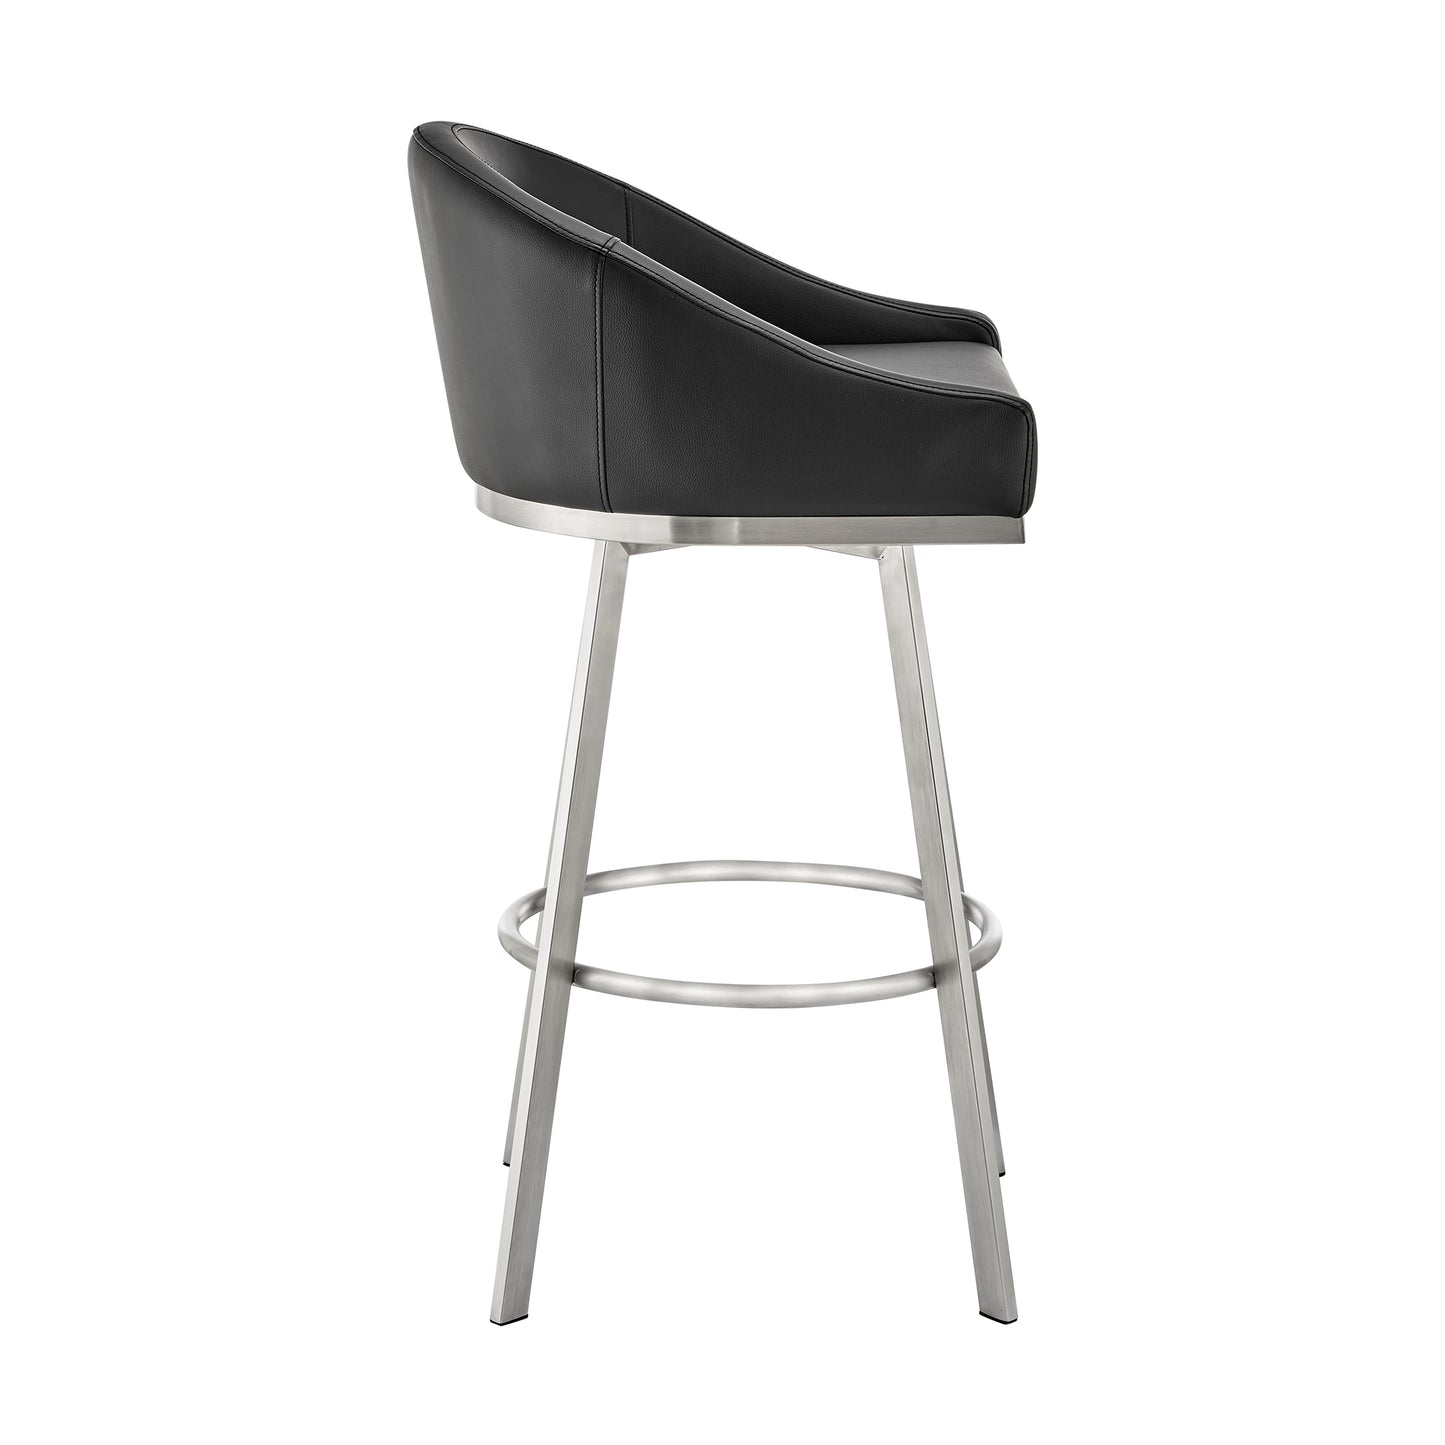 Eleanor 30" Swivel Bar Stool in Brushed Stainless Steel with Black Faux Leather